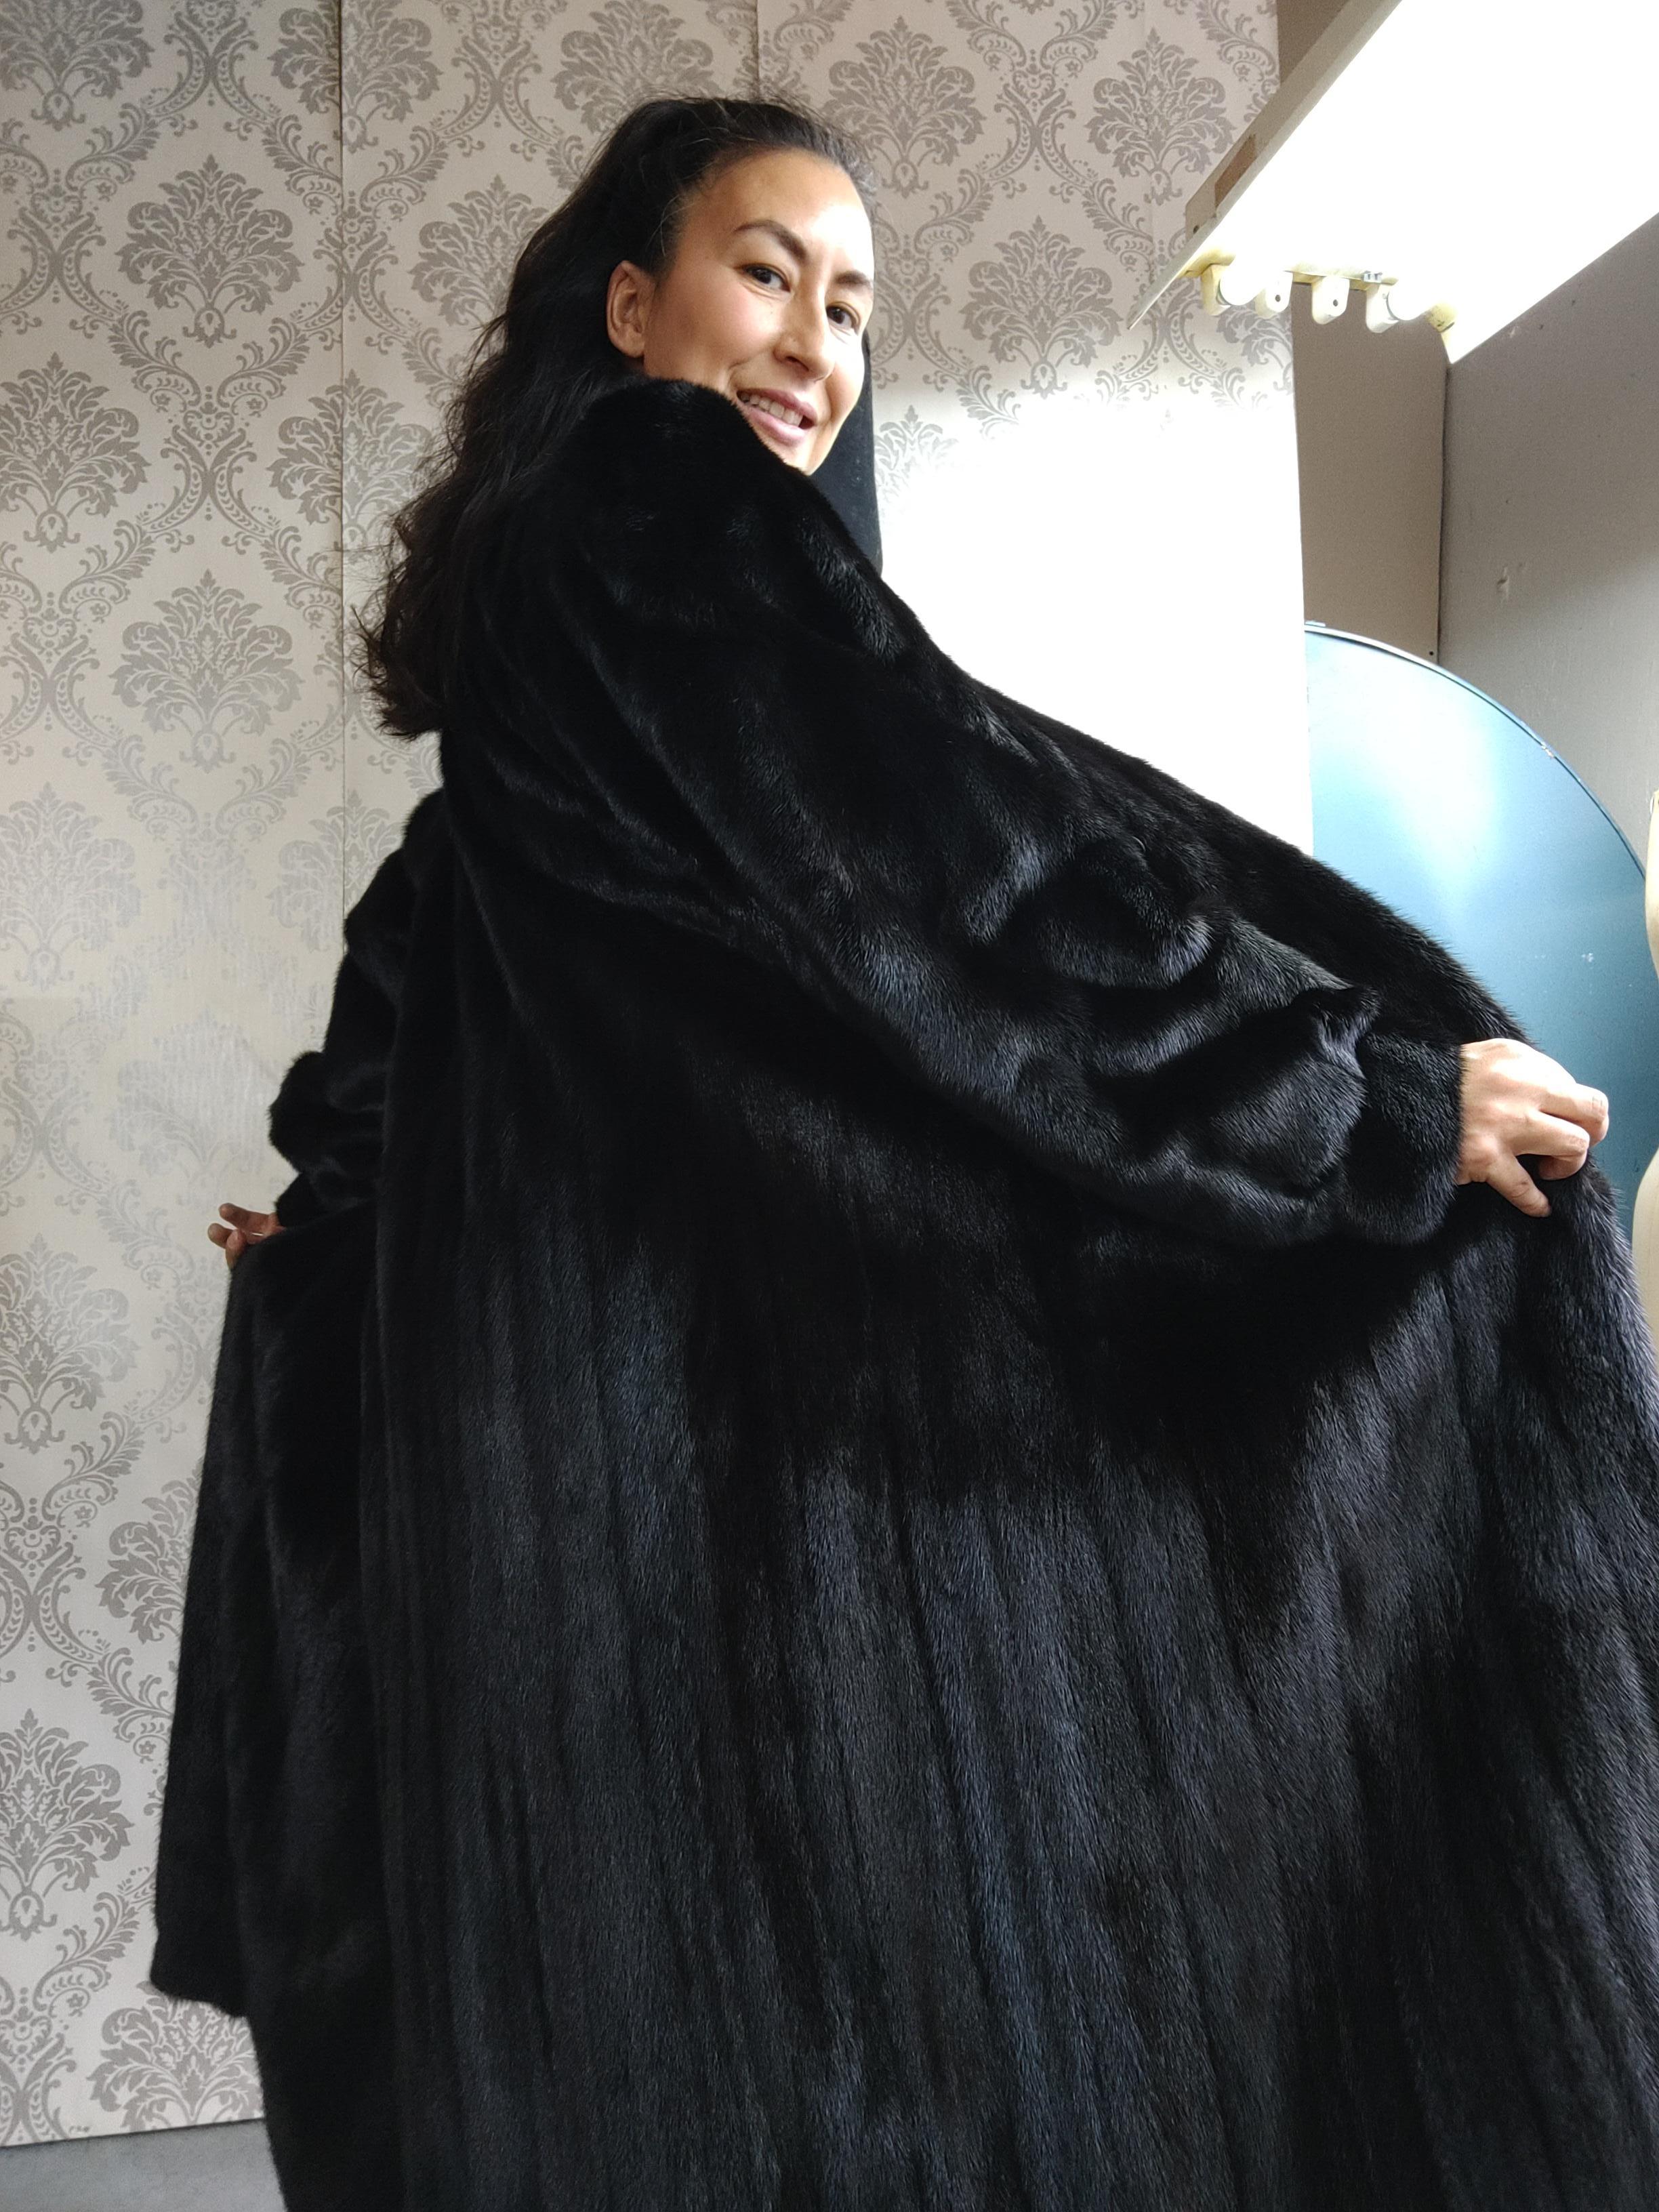 PRODUCT DESCRIPTION:

Brand new Christian Dior black mink fur coat with fluted sleeves 

Condition: New

Closure: Hooks & Eyes

Color: Black

Material: Black female opal mink 

Garment type: long length Coat

Sleeves: Dolman with fluted